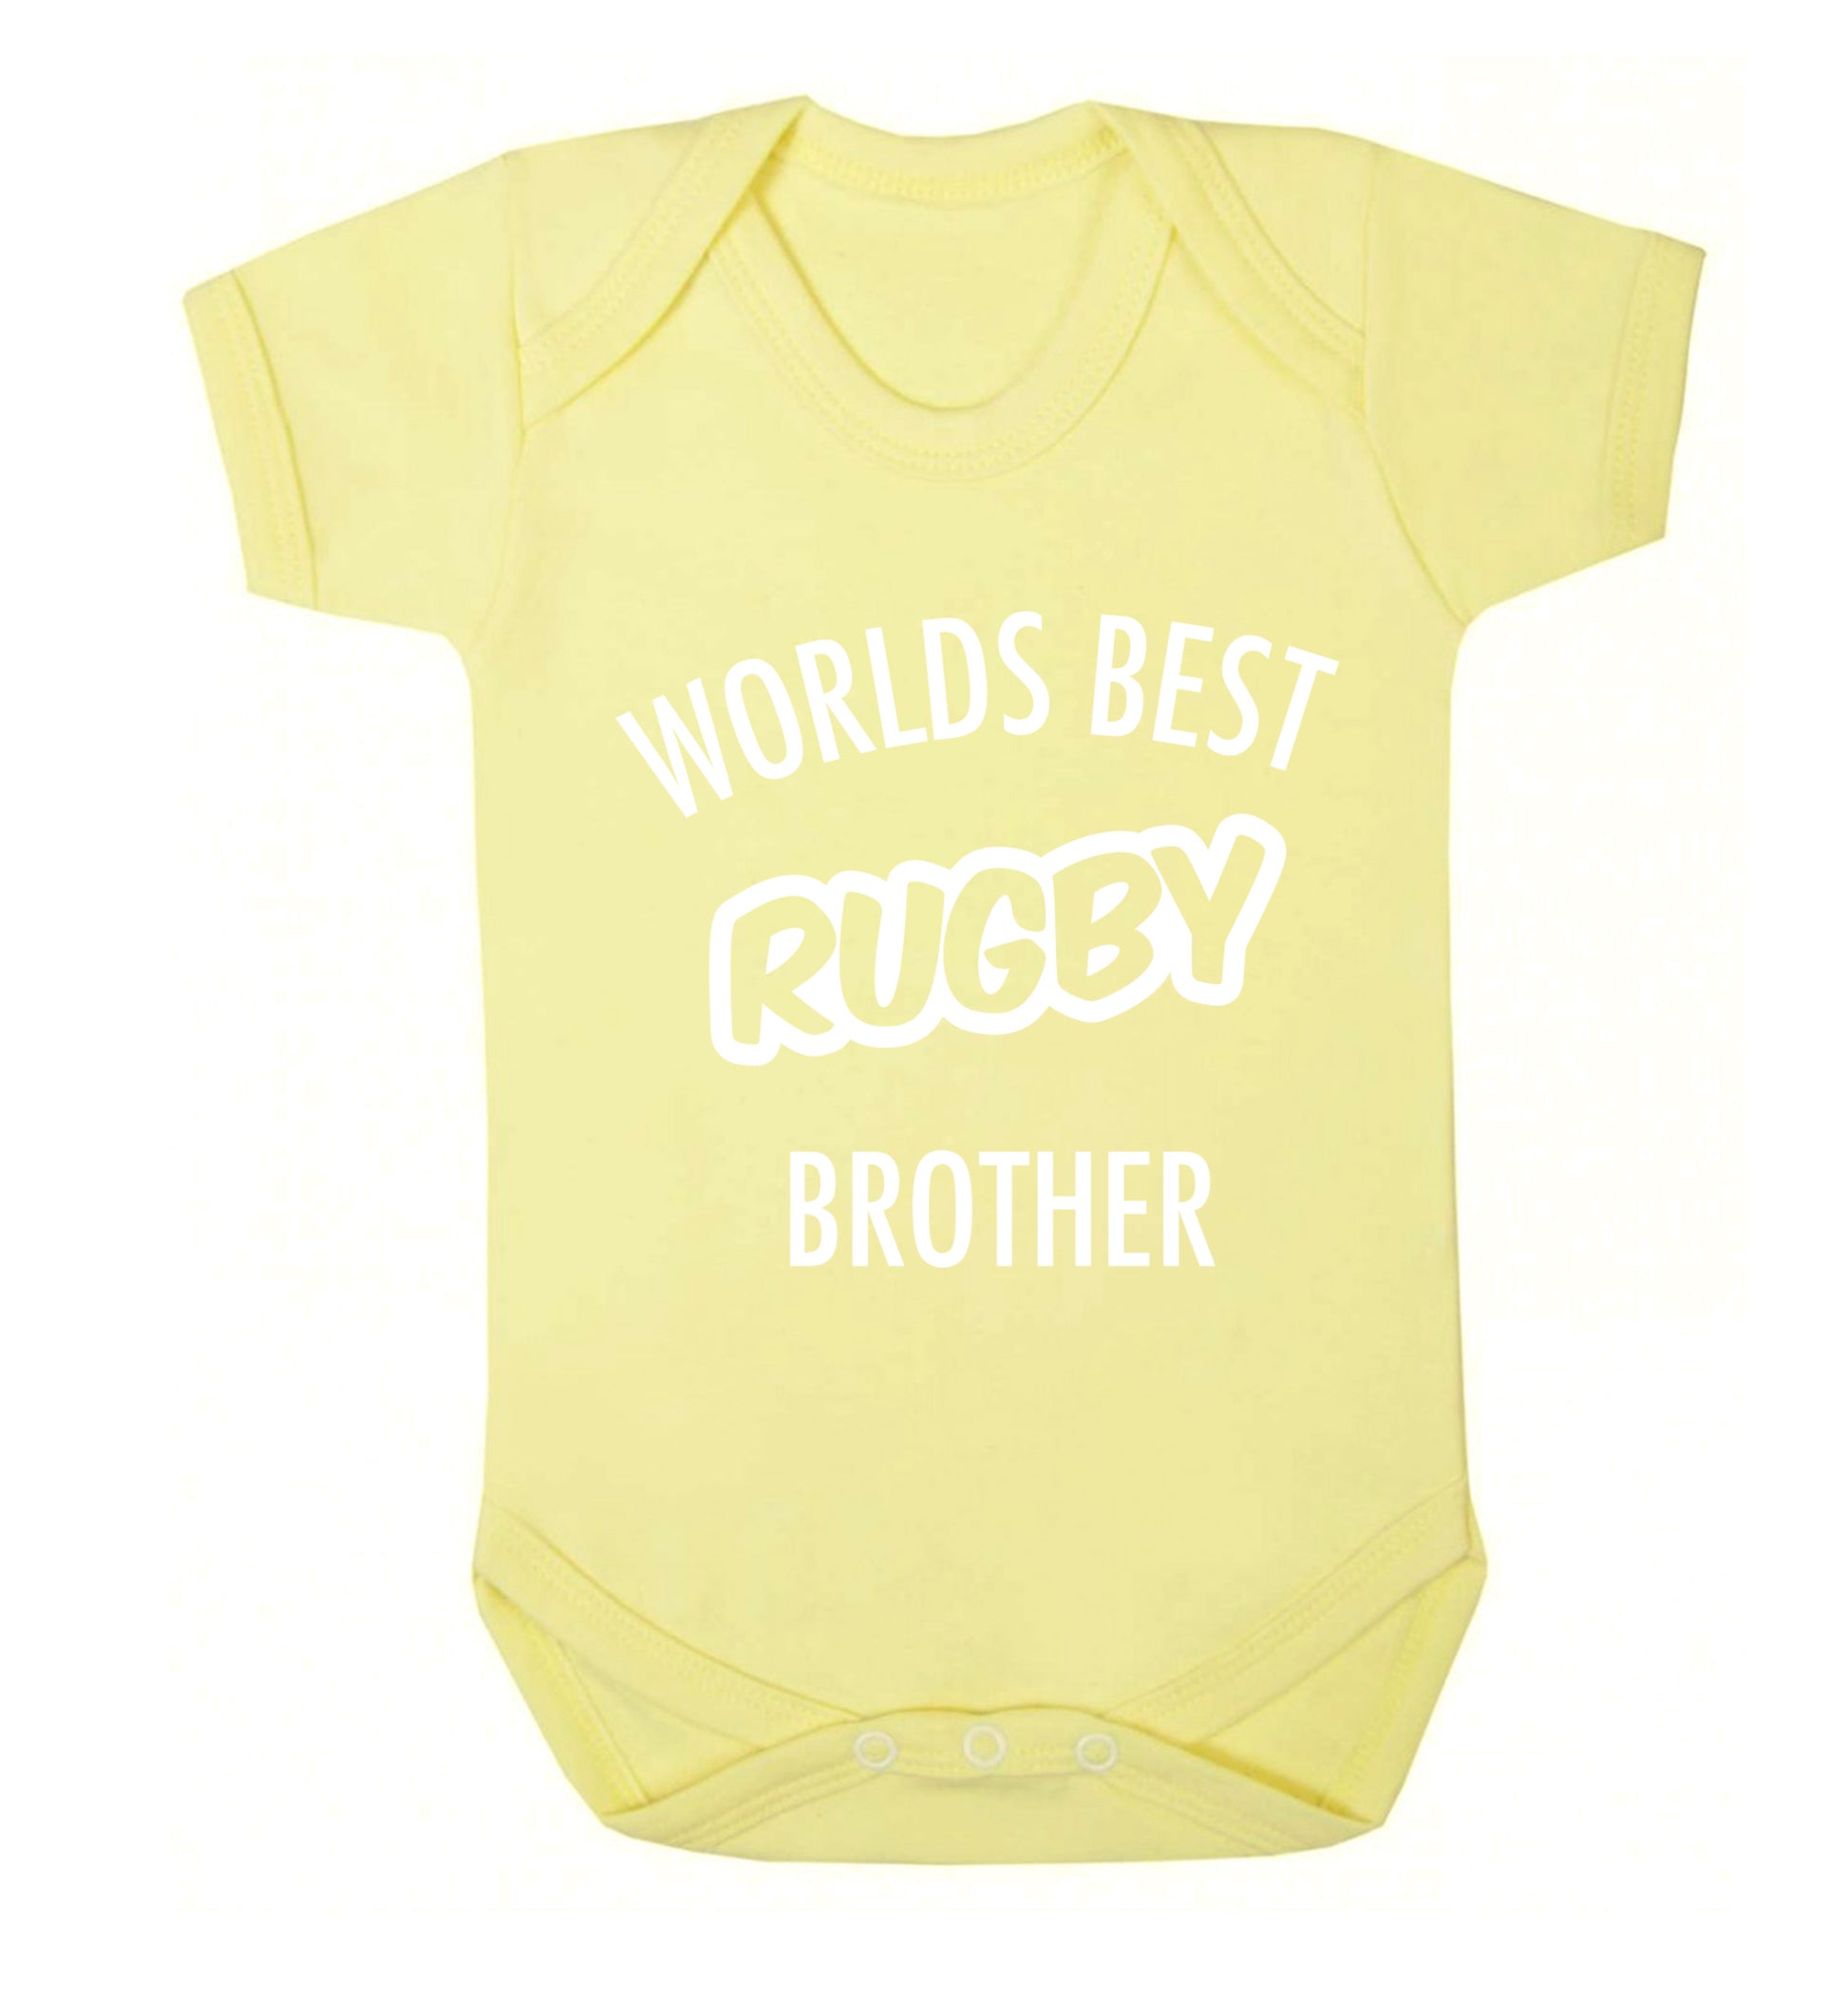 Worlds best rugby brother Baby Vest pale yellow 18-24 months